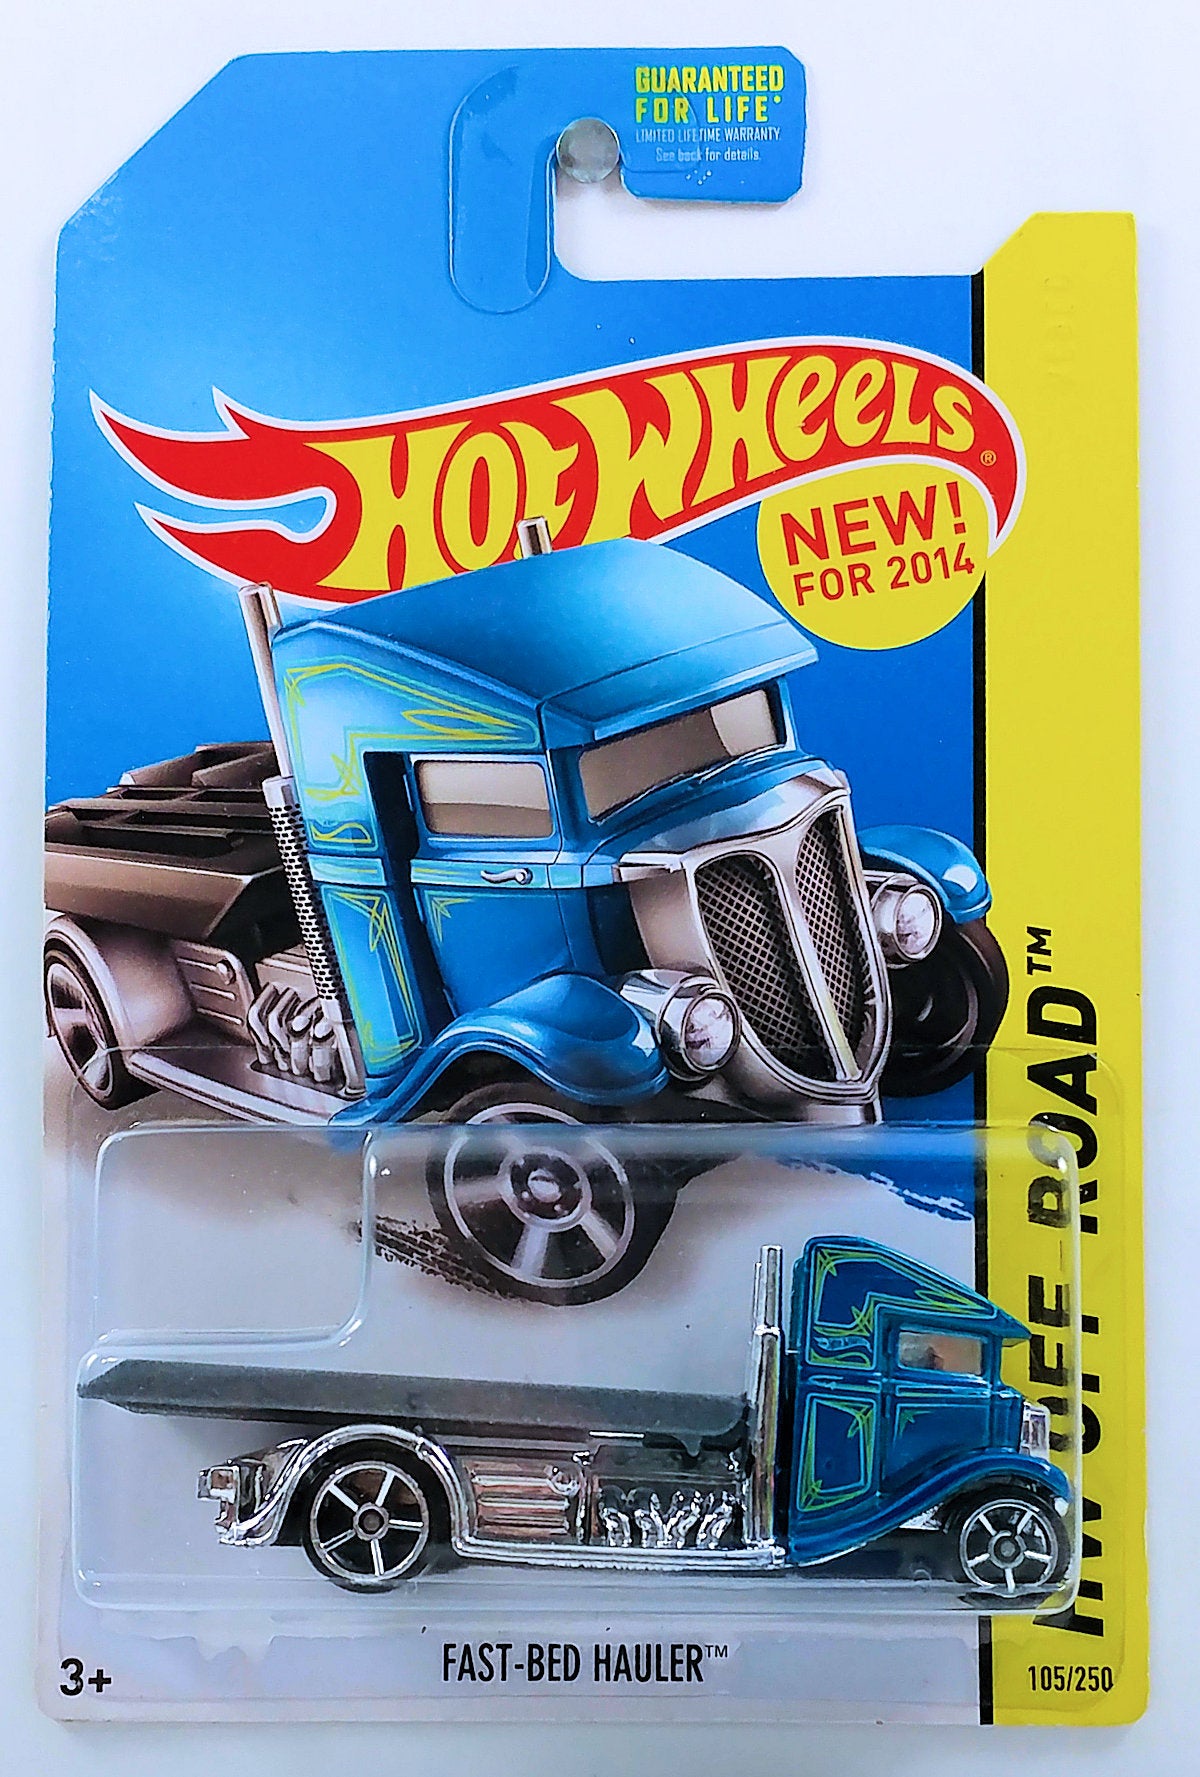 FINALLY got my hands on a fast bed hauler! 14 stores today. Coupe clips are  gifts to be customized. Saw 4 today! : r/HotWheels